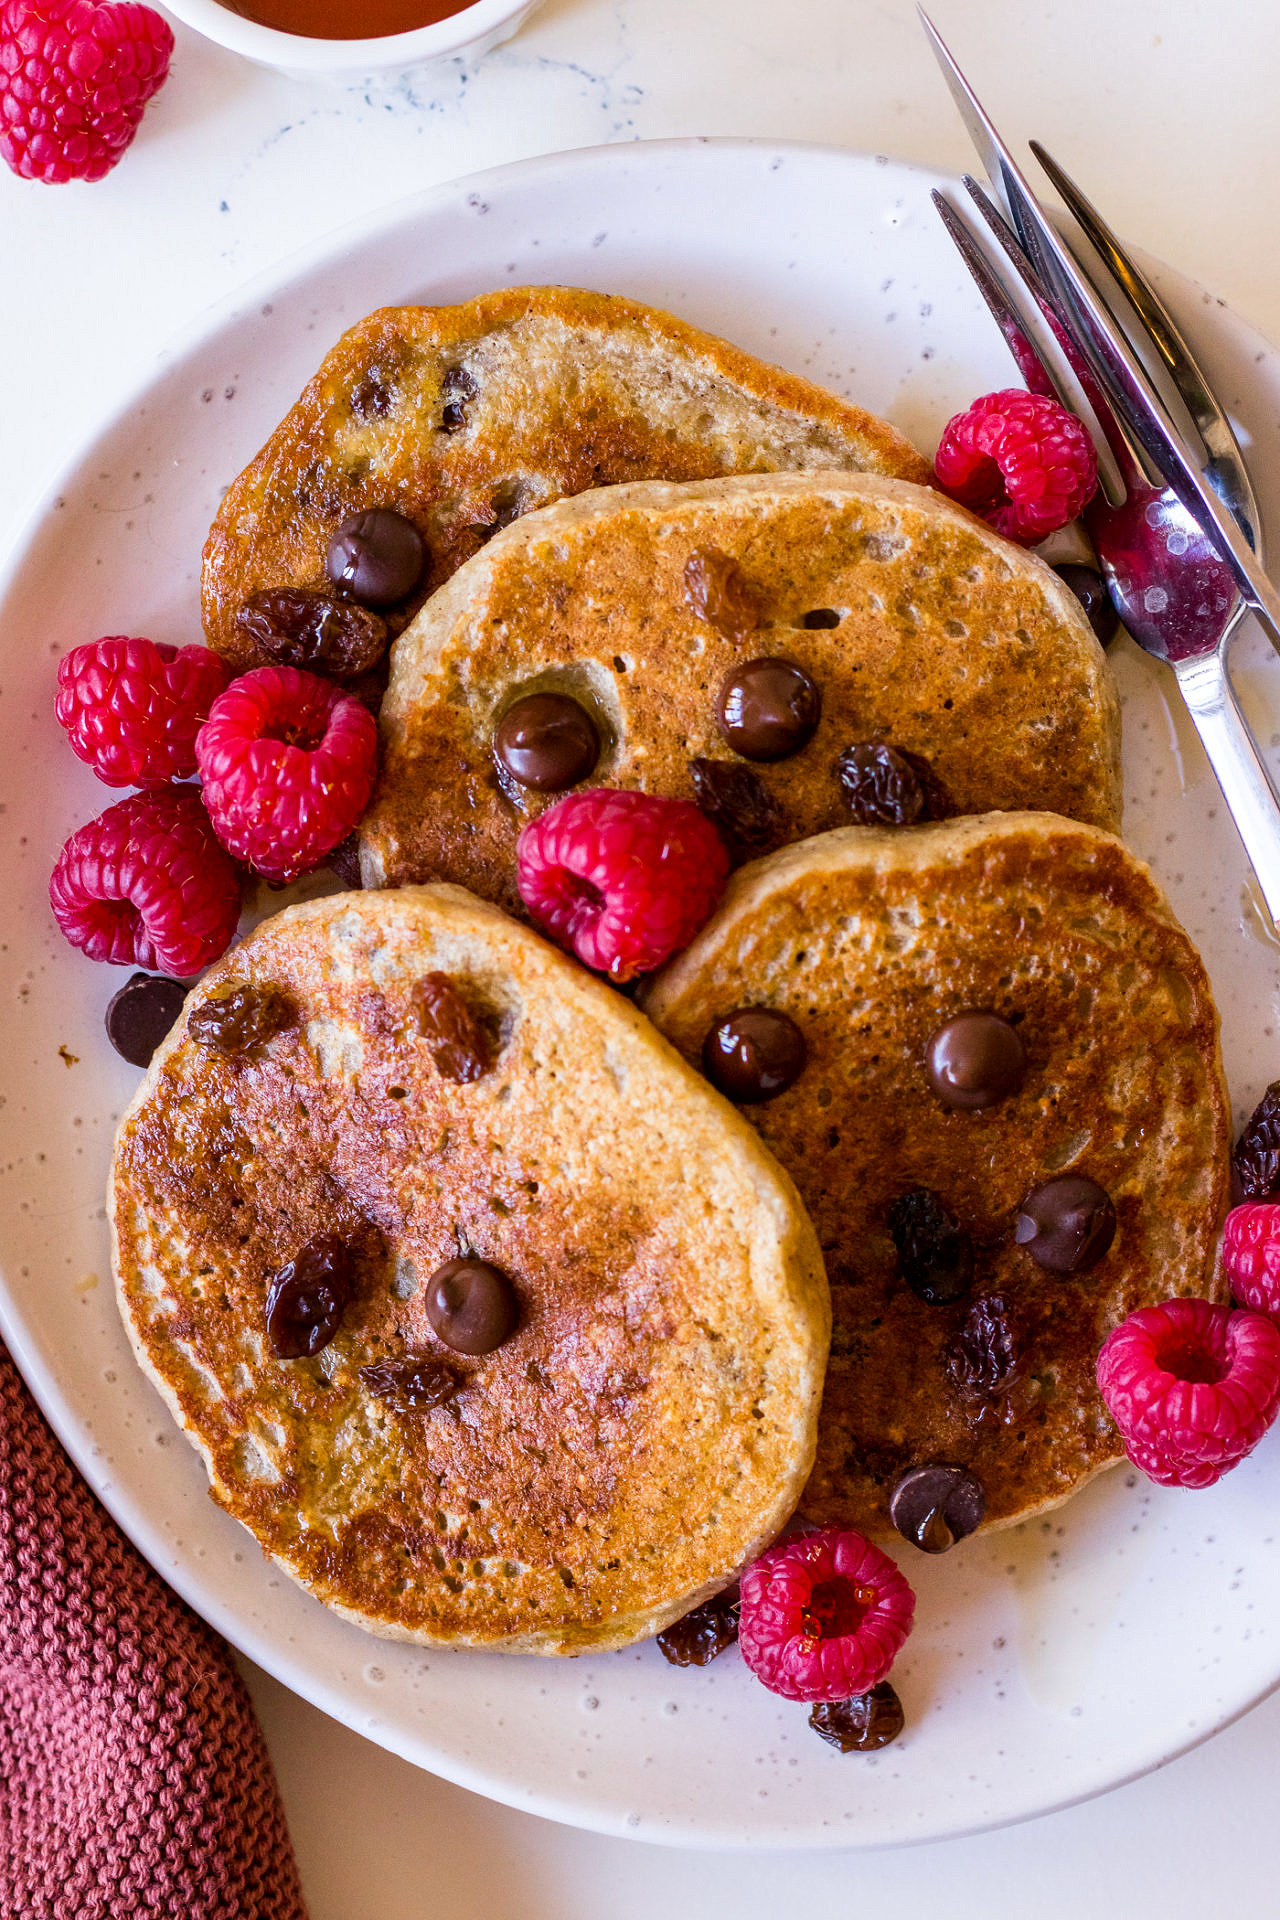 Vegan pancakes made with Happy Way protein powder served with berries, choc chips and maple syrup